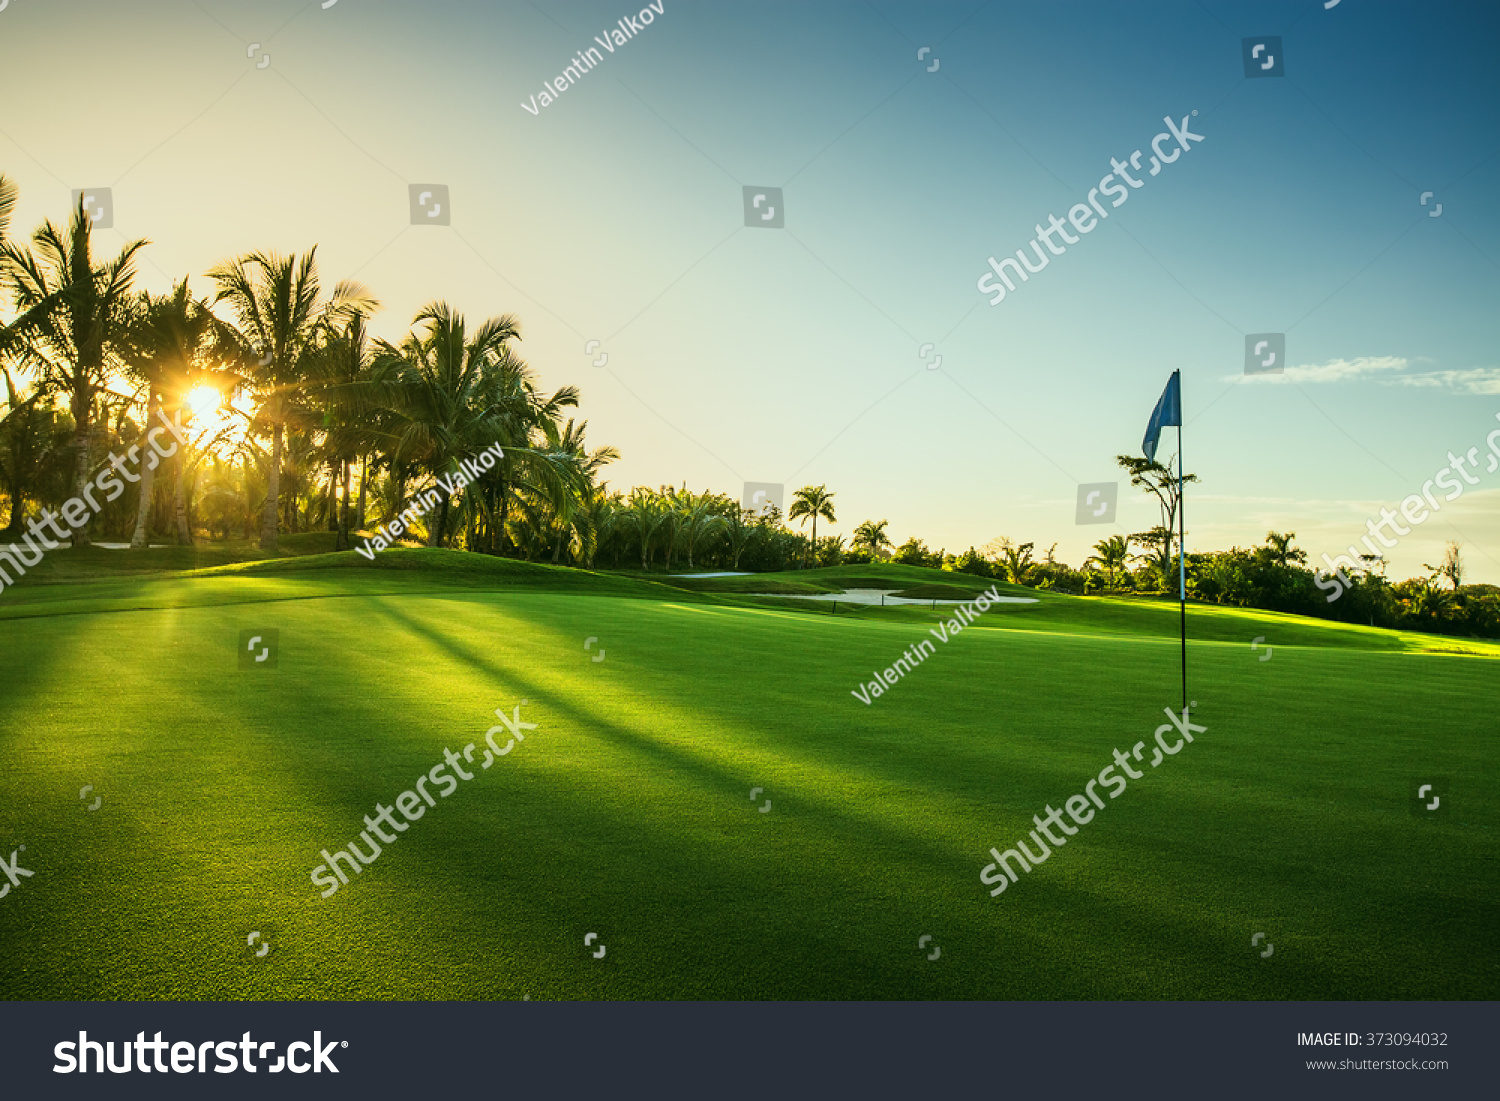 Golf course in the countryside #373094032